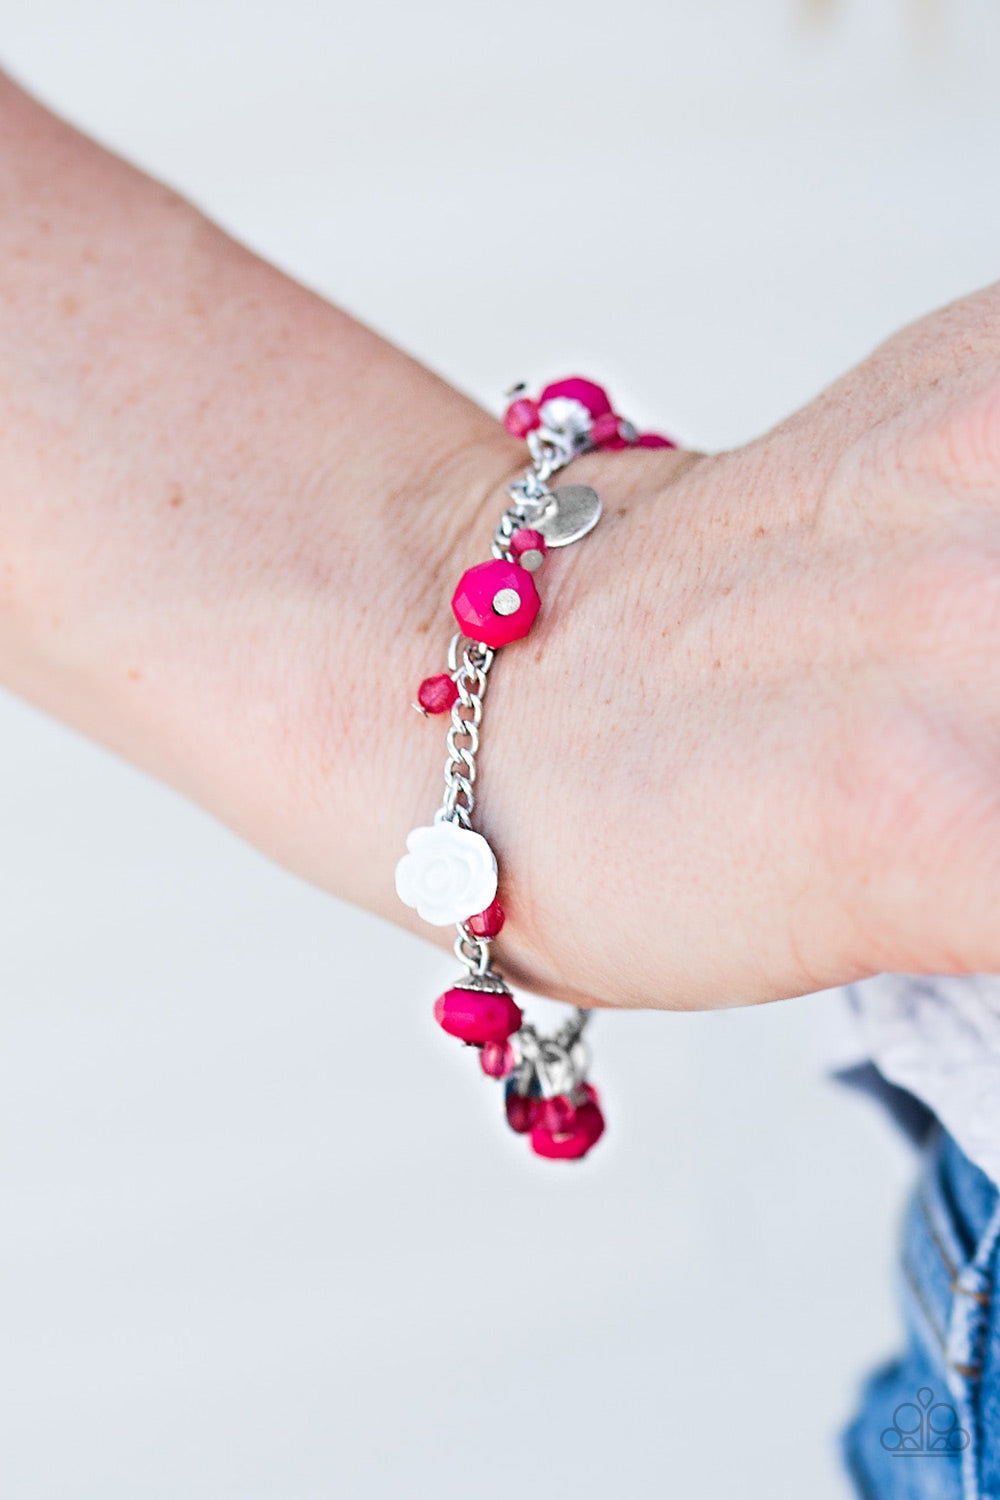 Paparazzi Jewelry & Accessories - Spoken For - Pink Bracelet. Bling By Titia Boutique